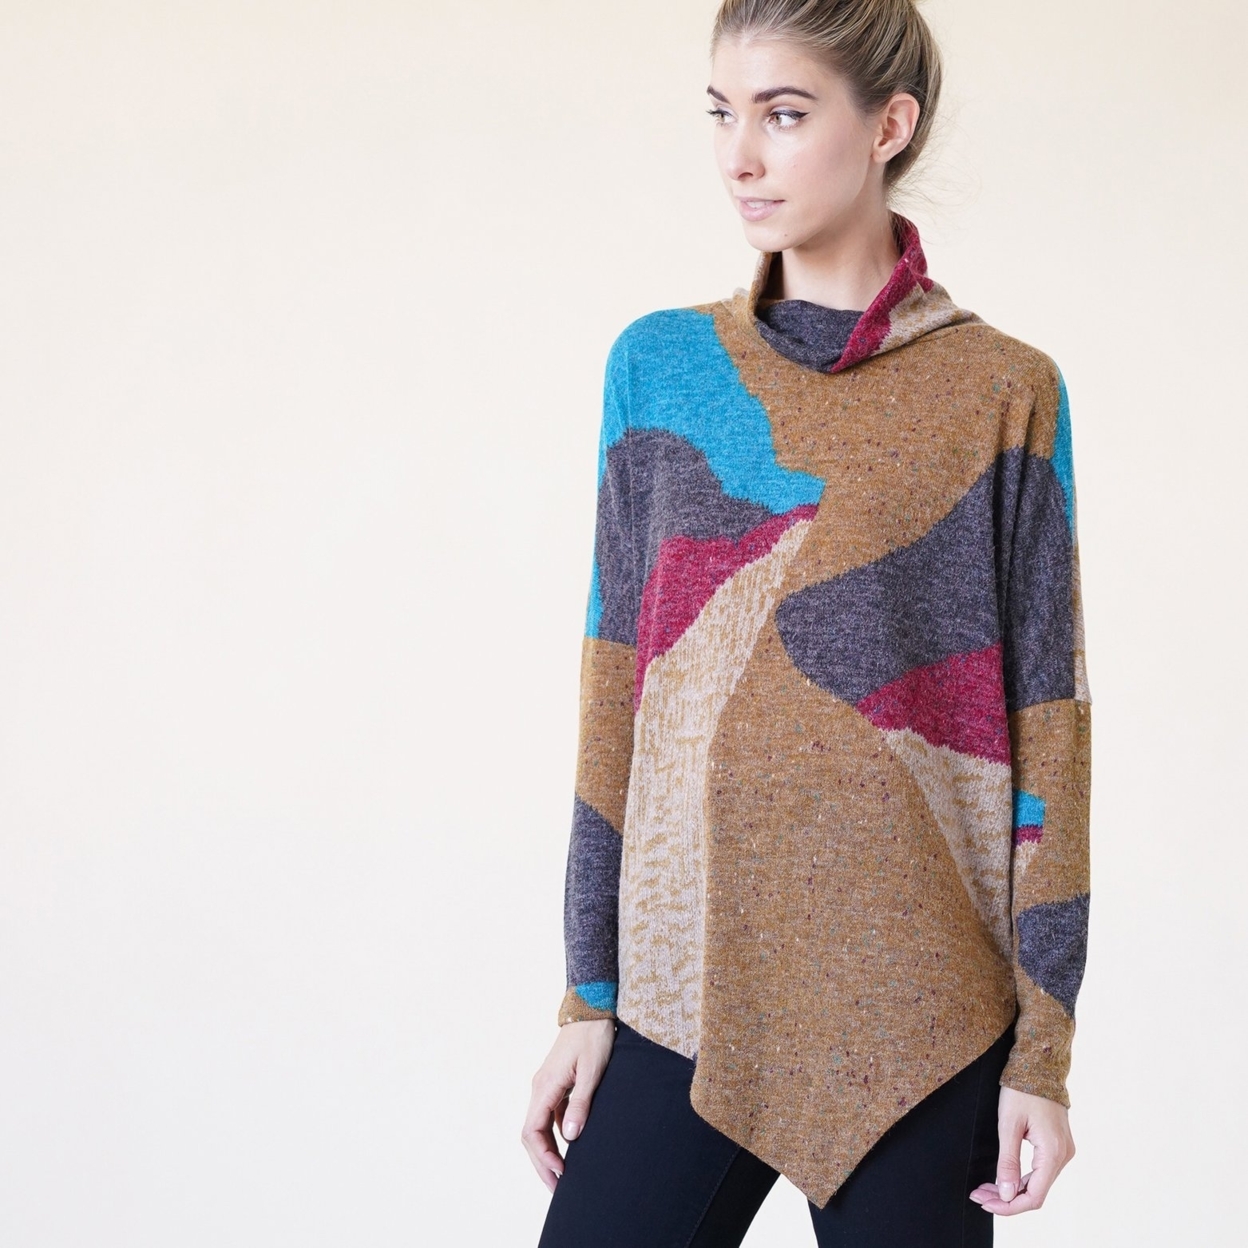 Asymmetrical Color-block Sweater - Taupe, Large (12-14)